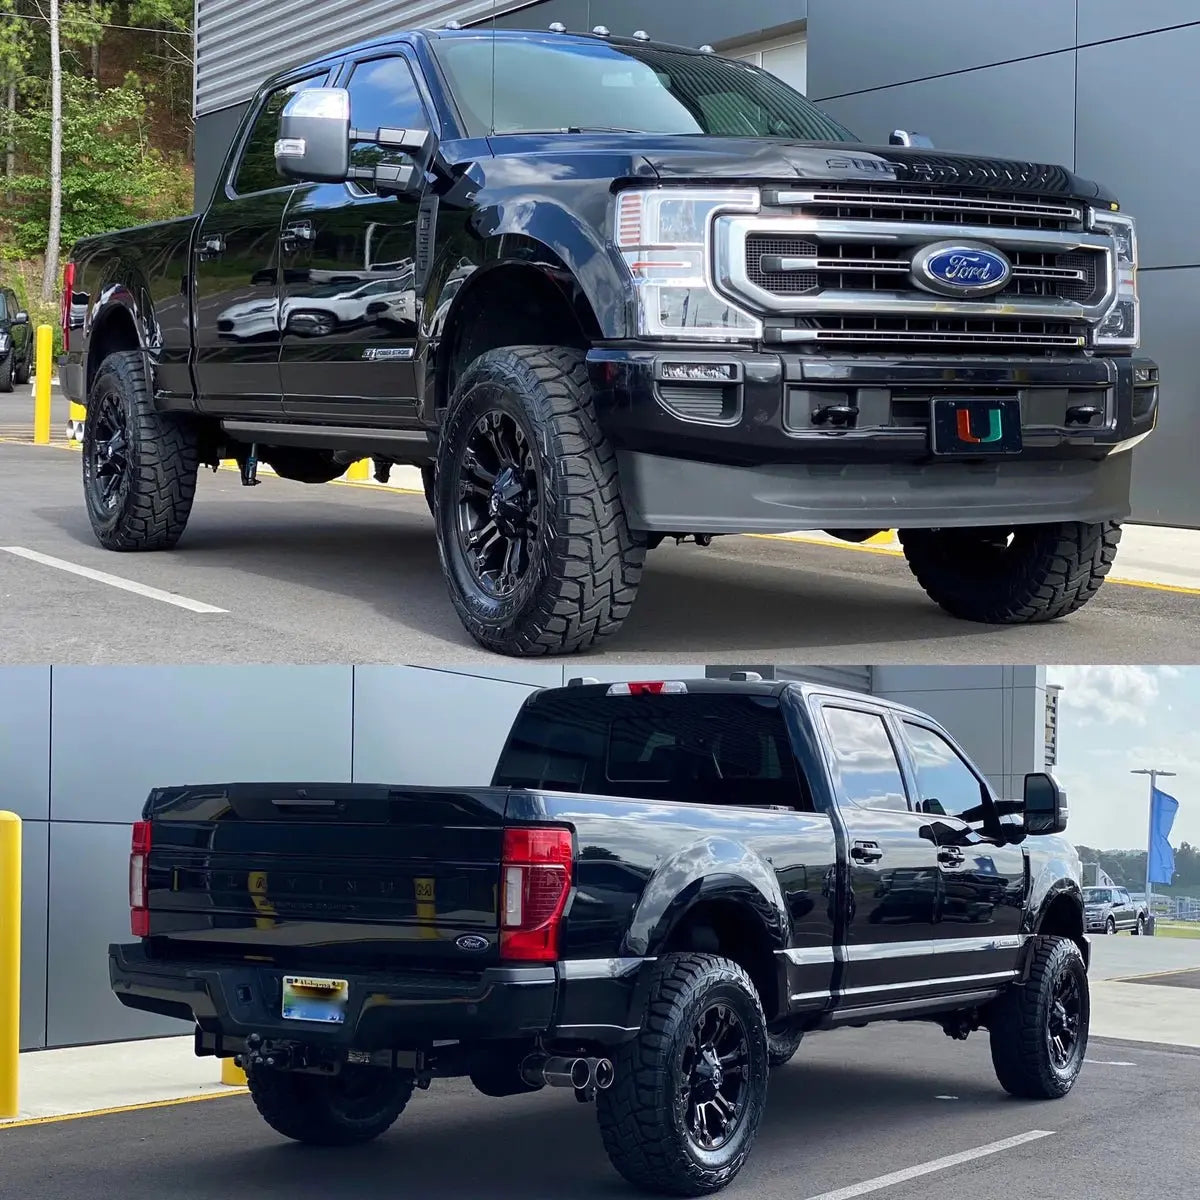 READYLIFT 2.5″ Coil Spring Lift Kit With Bilstein Shocks | 2017-2021 Ford F-250 SUPER DUTY 4WD DIESEL - Truck Accessories Guy